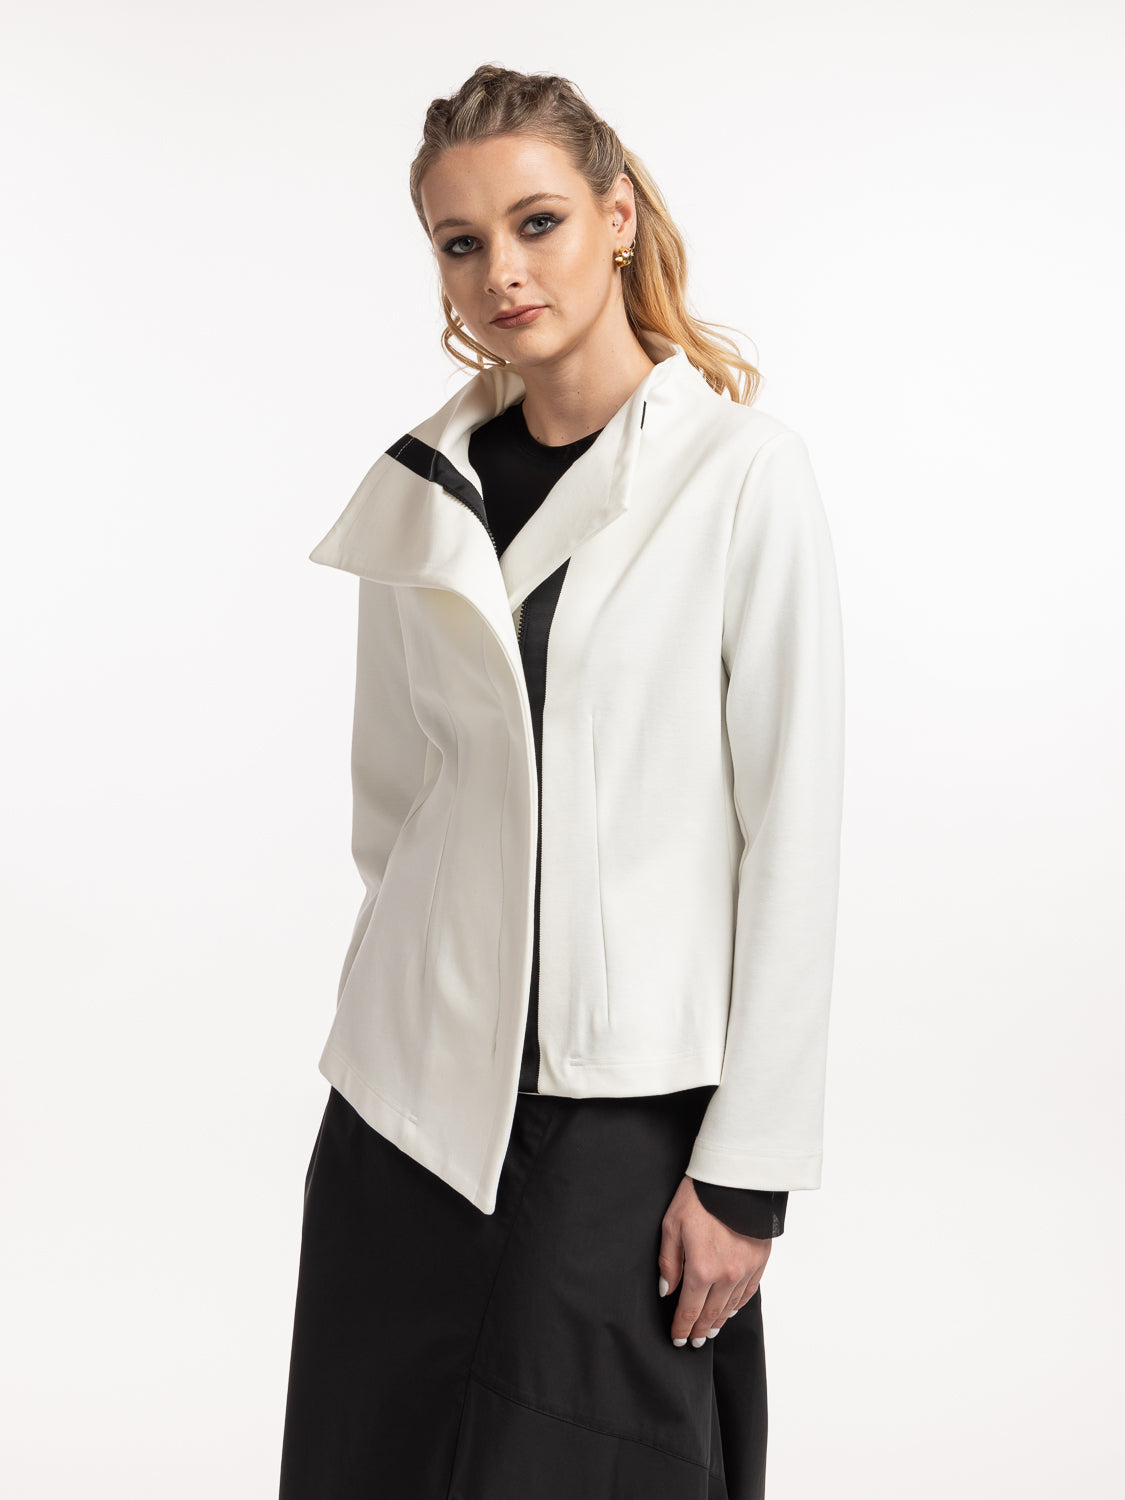 STYLE X LAB EXTENSION JACKET - IVORY - THE VOGUE STORE